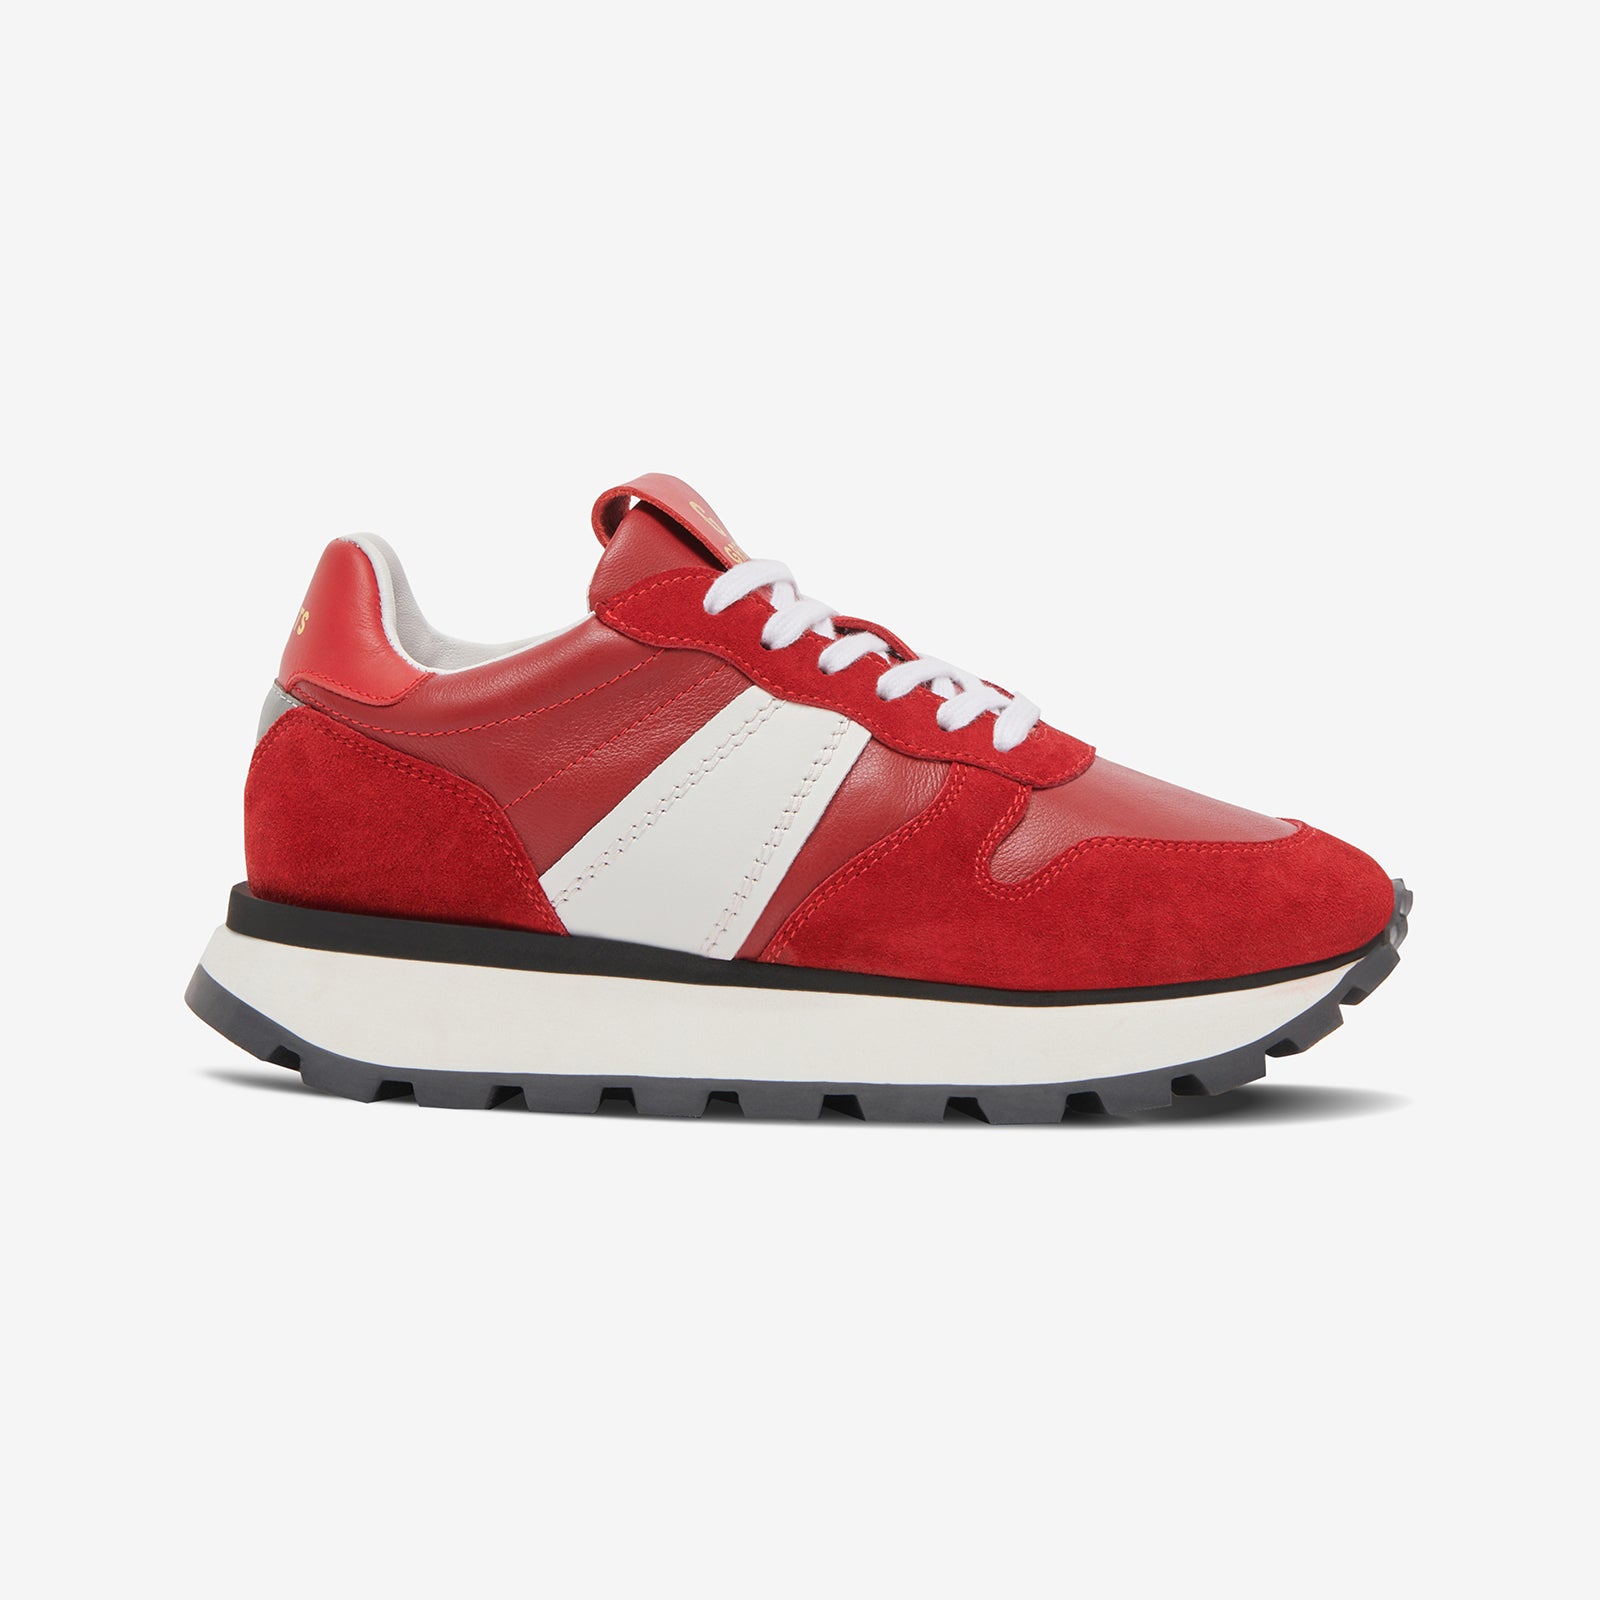 Greats - The Greenpoint Runner - Red - Women's Shoe – GREATS